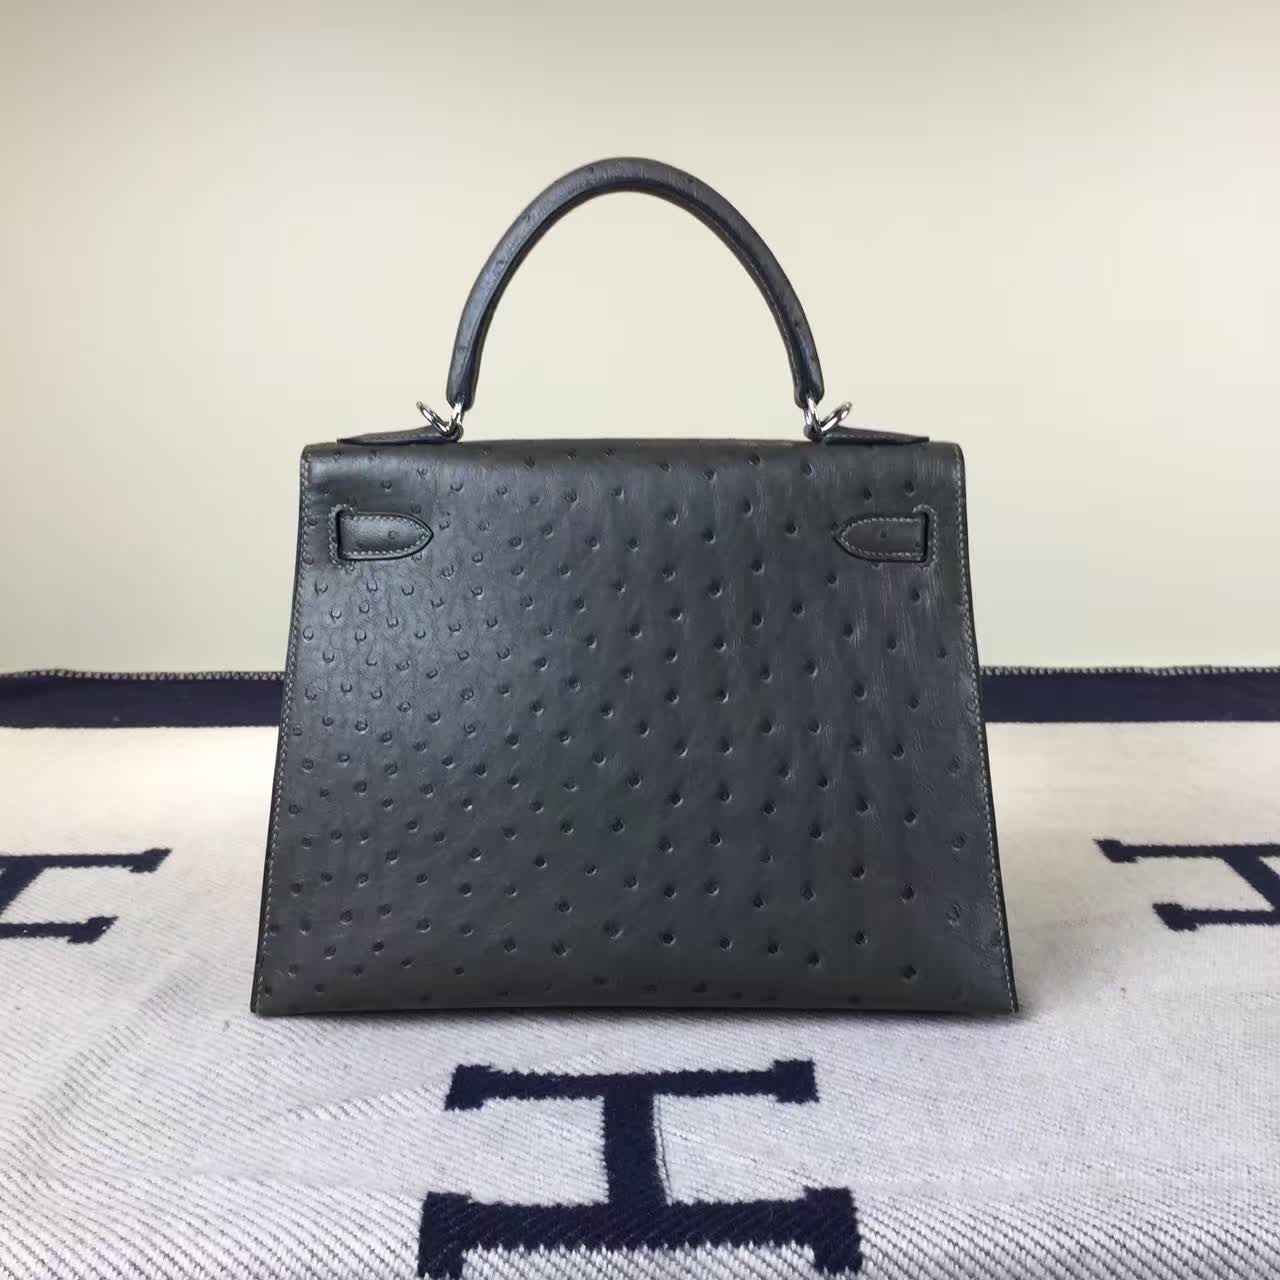 Hand Stitching Hermes Ostrich Leather Kelly Bag28CM in 8F Etain Grey